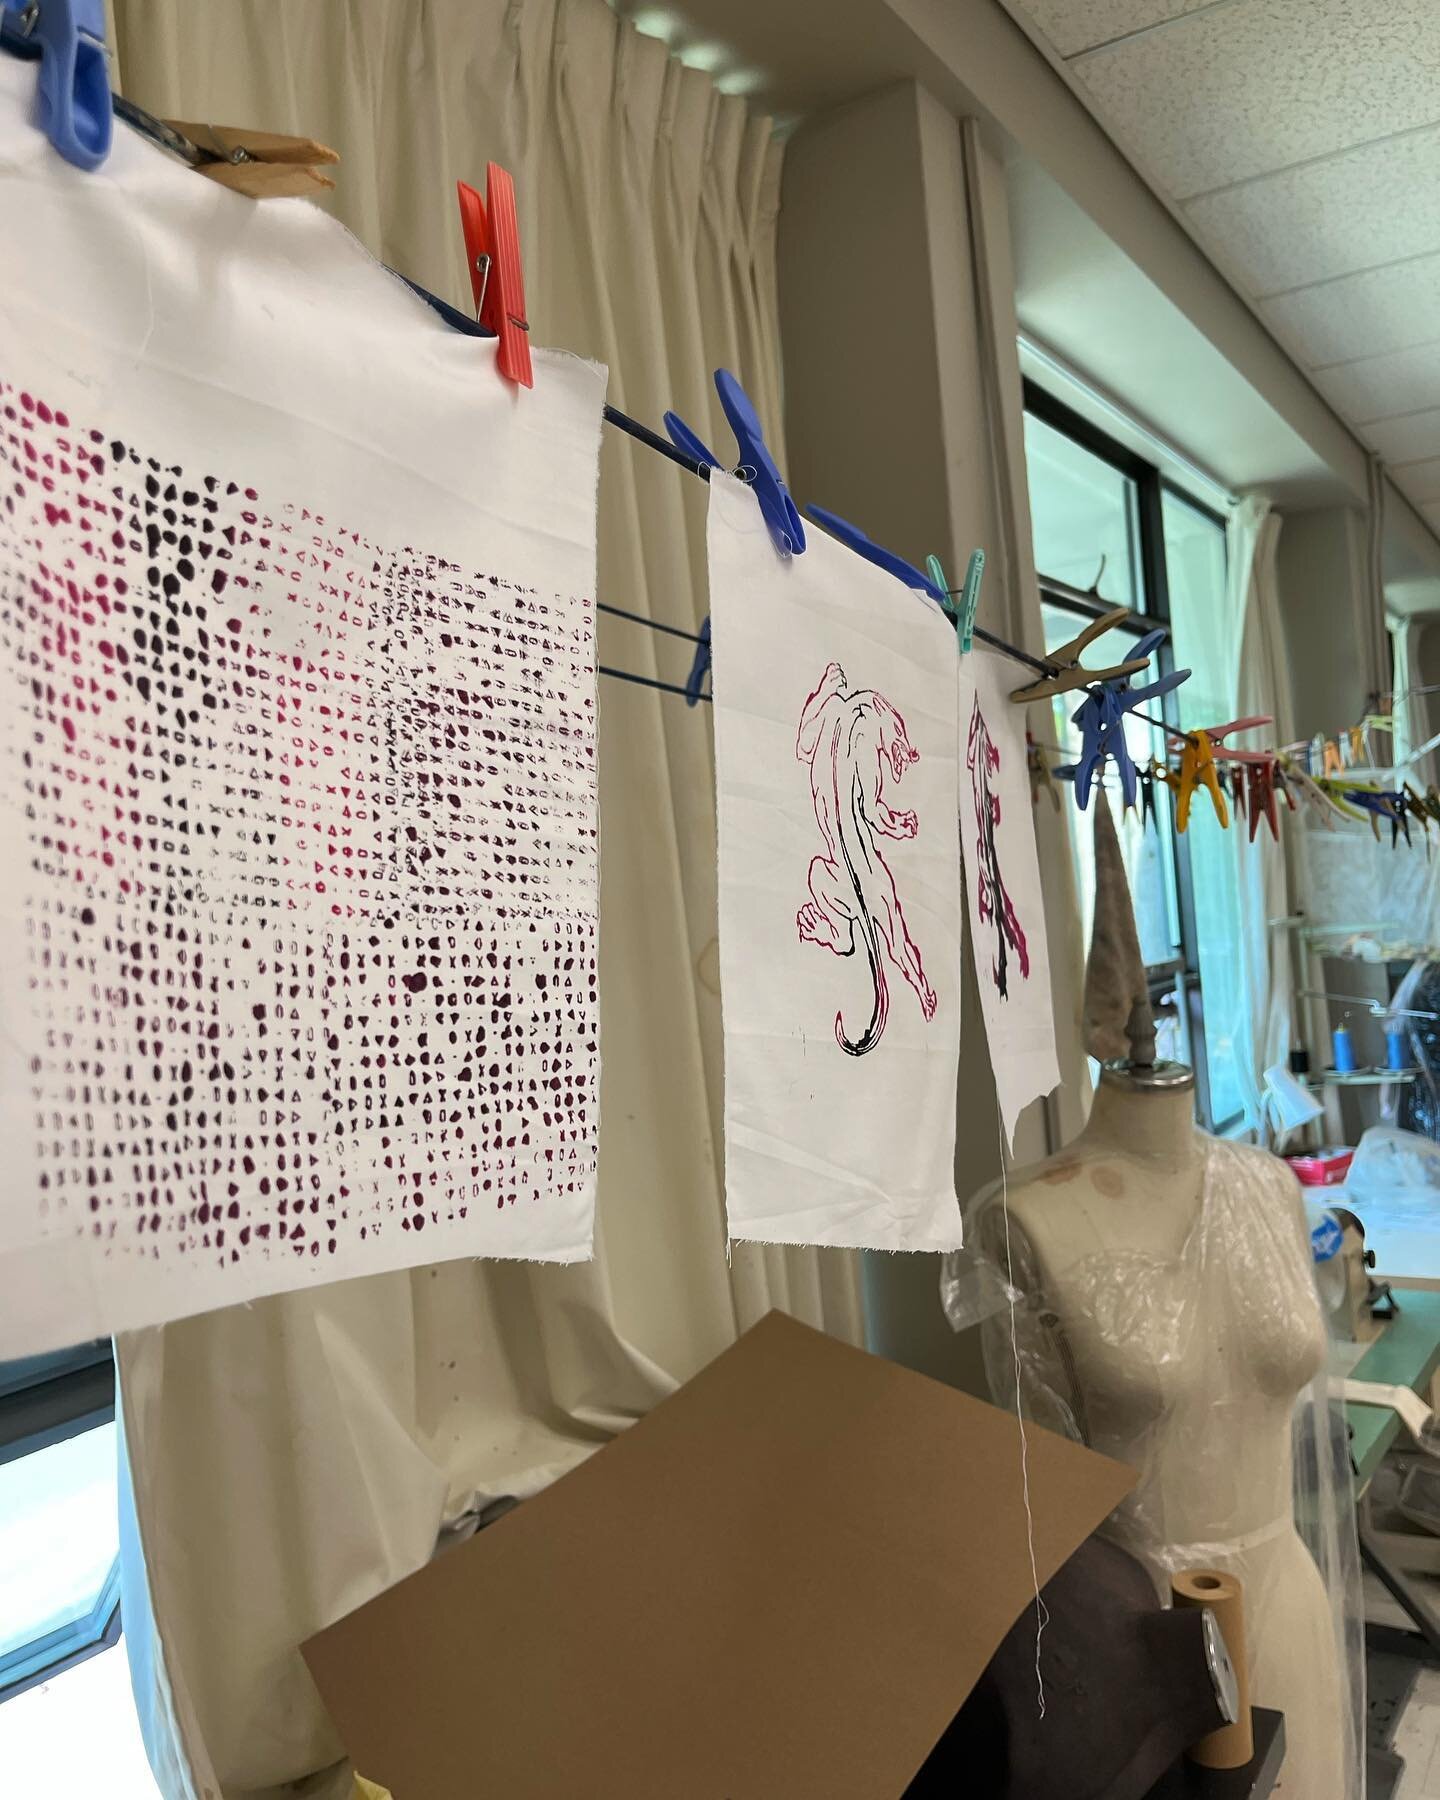 Silk screens, stencils and block prints, oh my!
.
.
.
We&rsquo;re back in the textiles studio after a few weeks away for holidays and field trips, and we&rsquo;re hard at work (or should I say play?) learning the ins and outs of silk screening and st